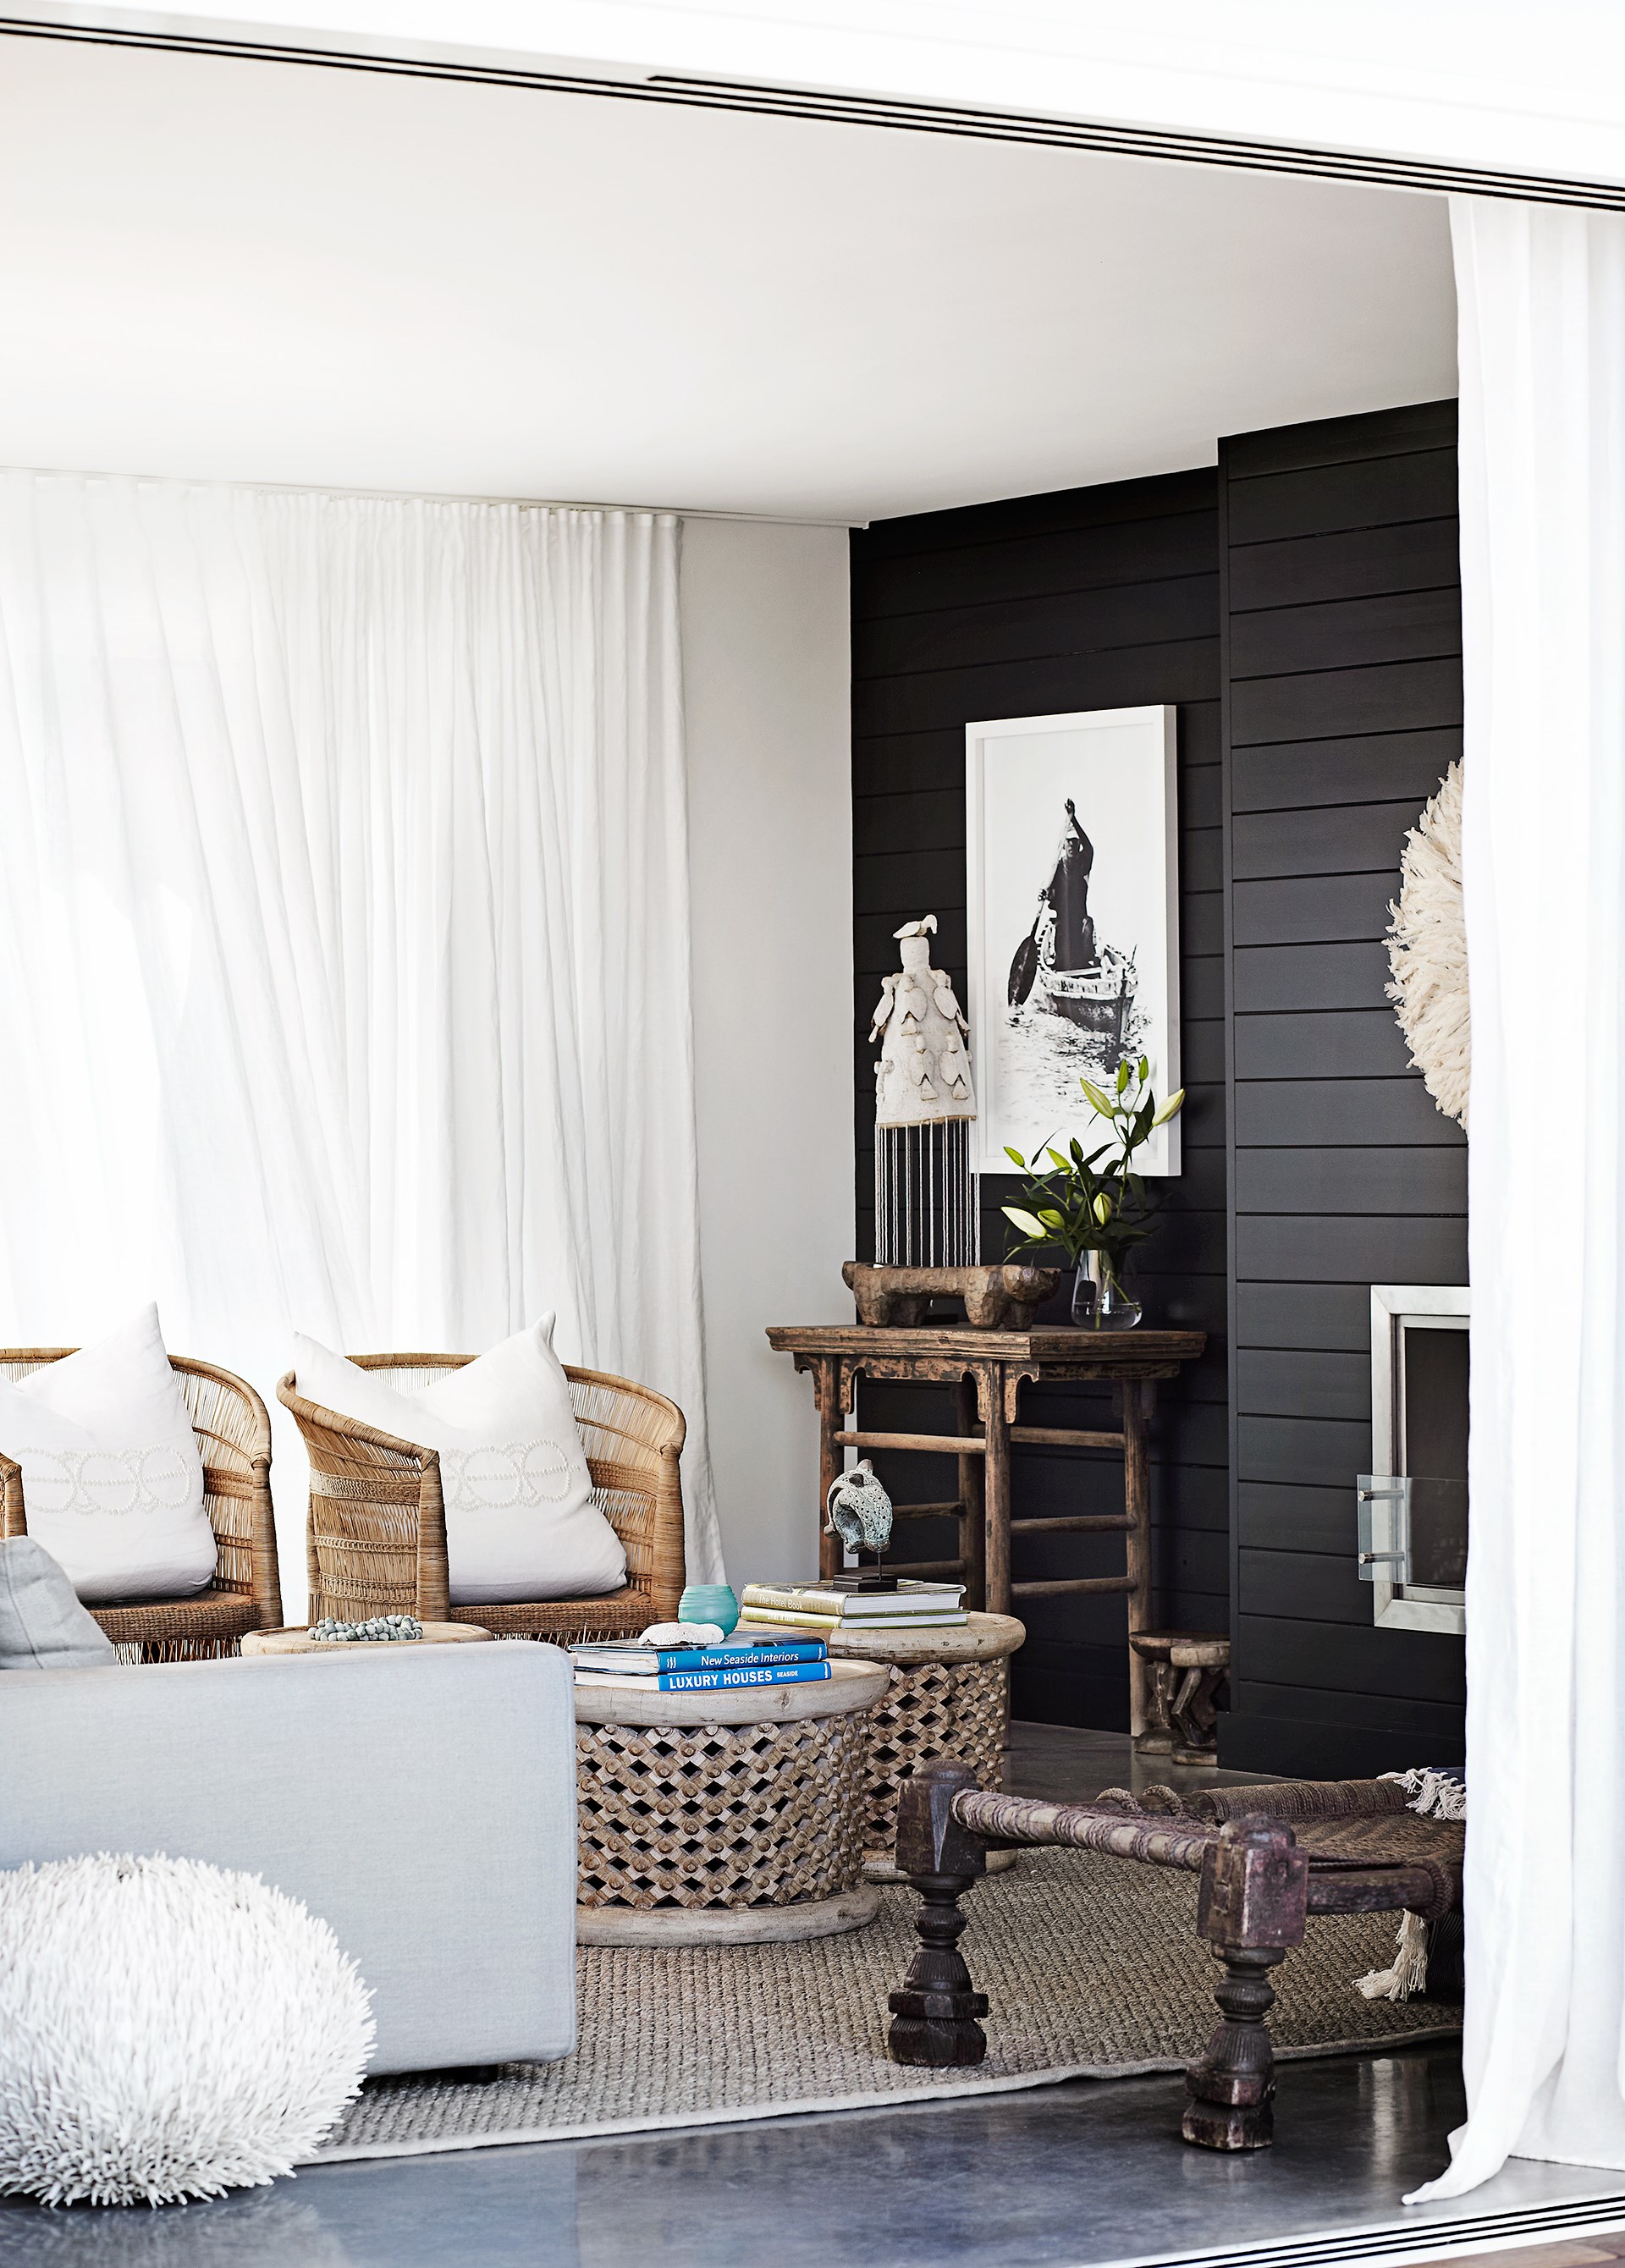 Bold hues, tribal and organic objects mix with rustic furniture and a coastal aesthetic in this [global-inspired weatherboard home](http://www.homestolove.com.au/weatherboard-home-with-wow-factor-3458|target="_blank"). It's interesting and romantic – East meets West, French meets Farmhouse, Africa goes Coastal. Collect till your heart's content. Photo: Sharyn Cairns / real living